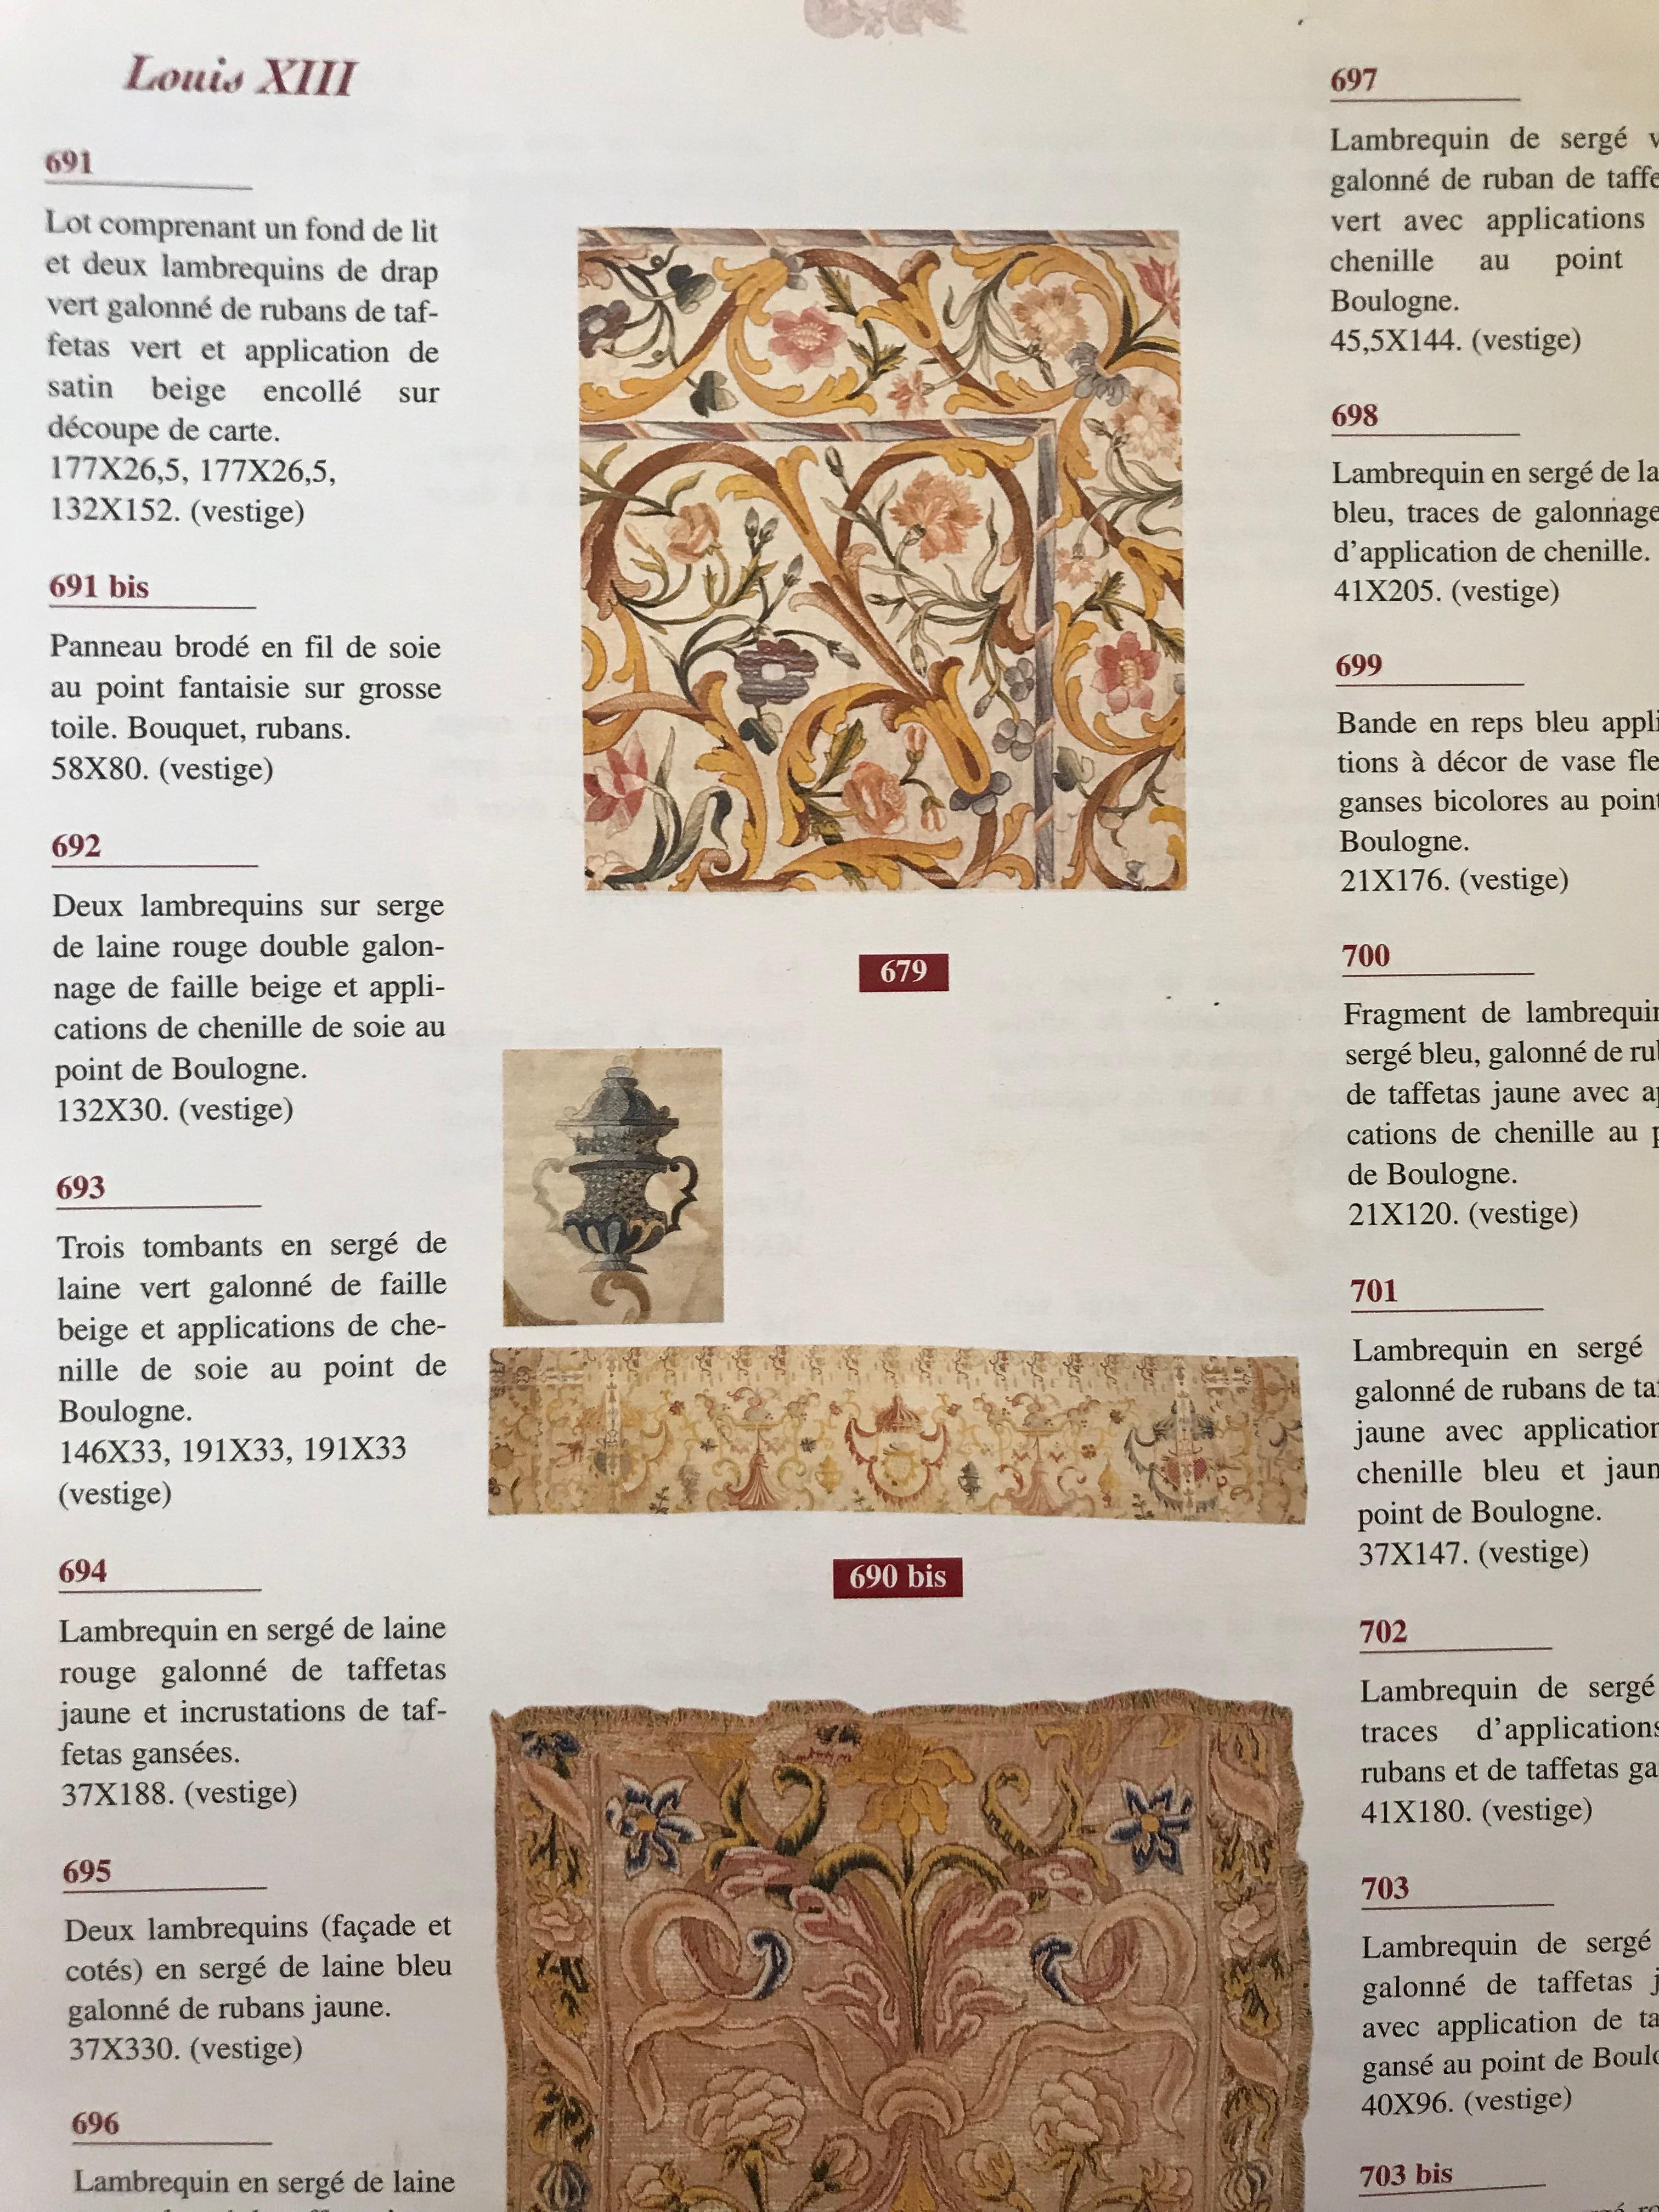 Exceptional master tapisserie from Brocard Museum Royal collection, brought directly from the estate of the Museum; Vente collection brocard 1998; P.D...
Stamps and reference number of the musuem collection!

Brocard took over, in 1880 the